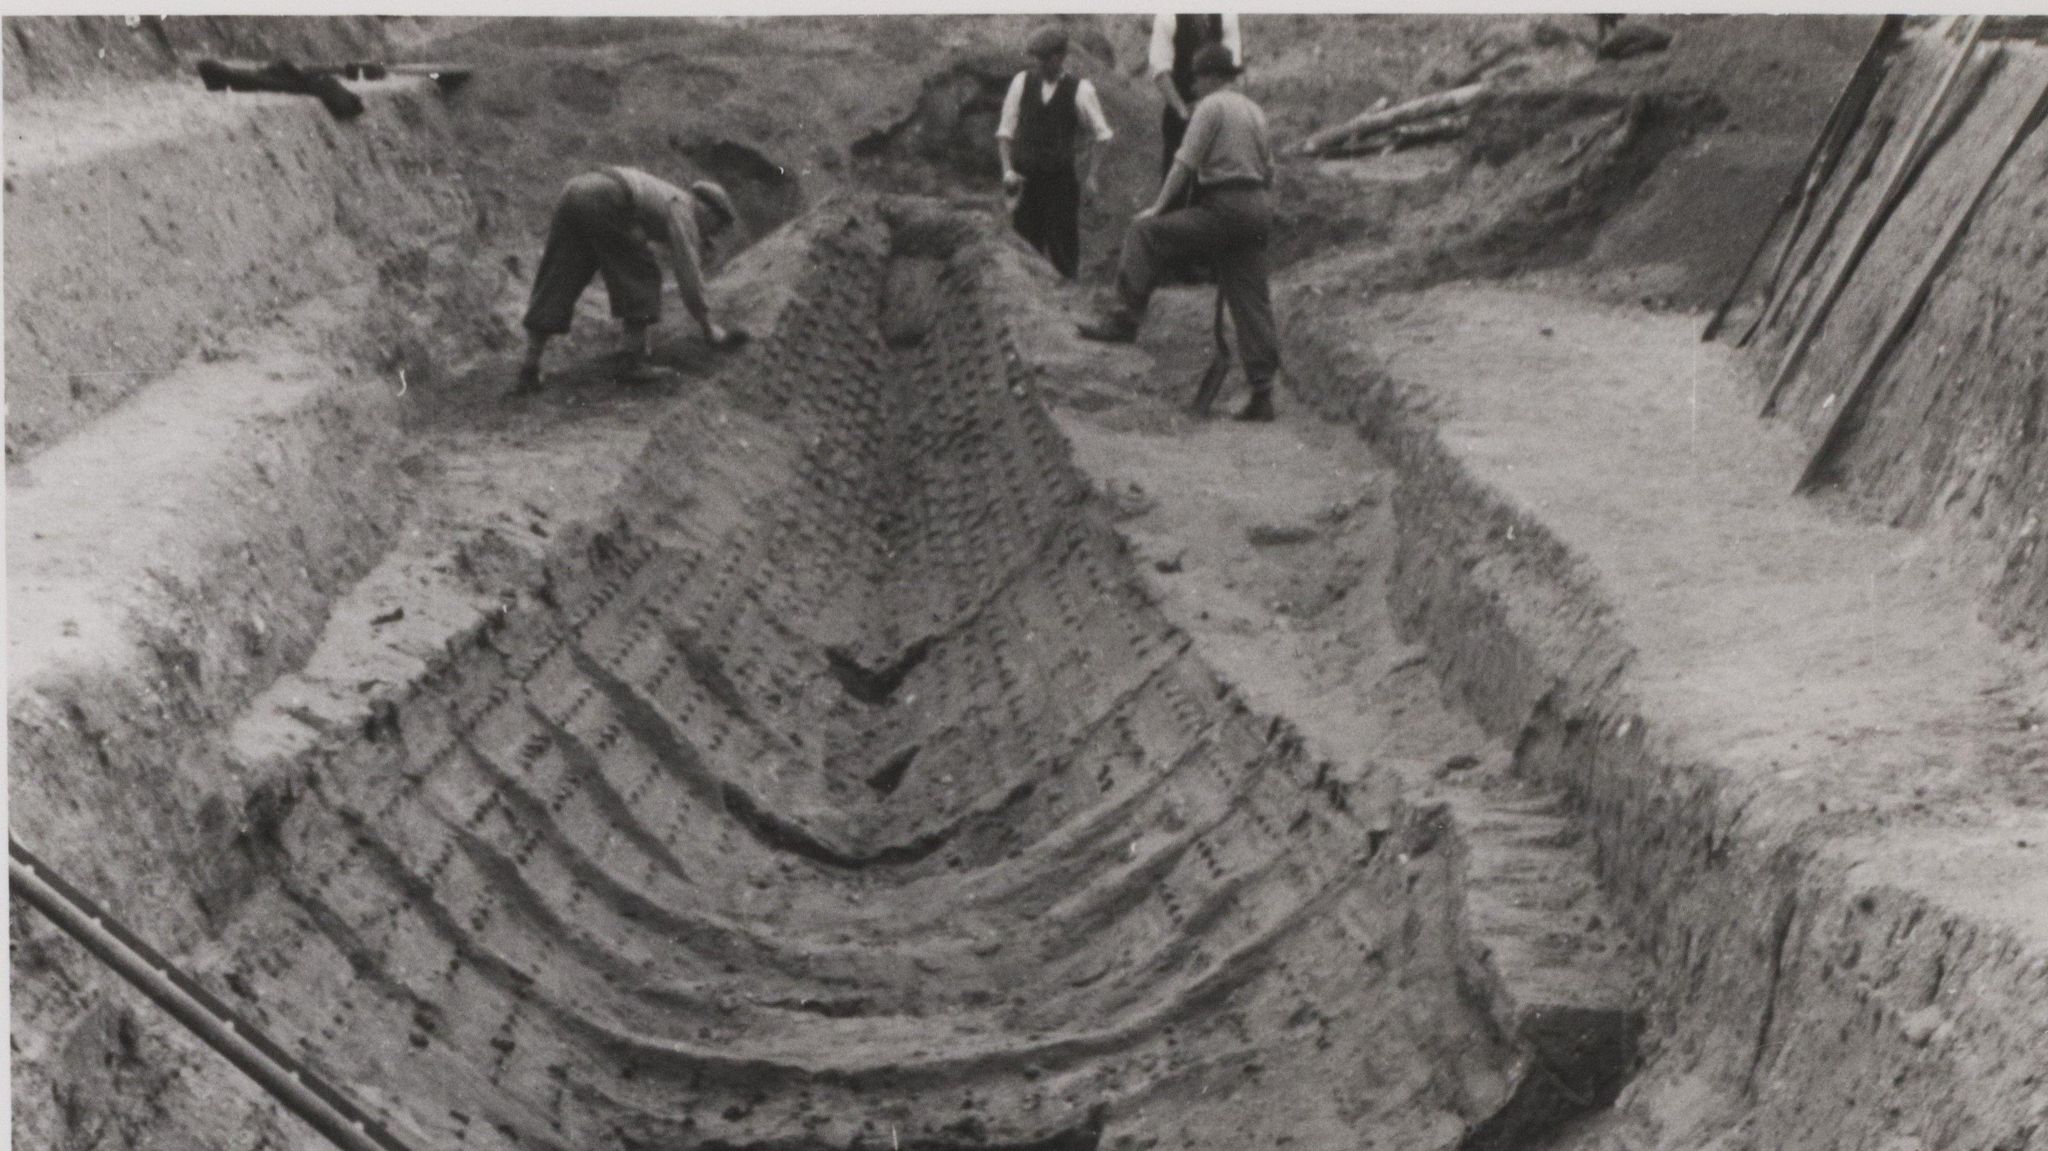 The original ship found buried at Sutton Hoo in 1939